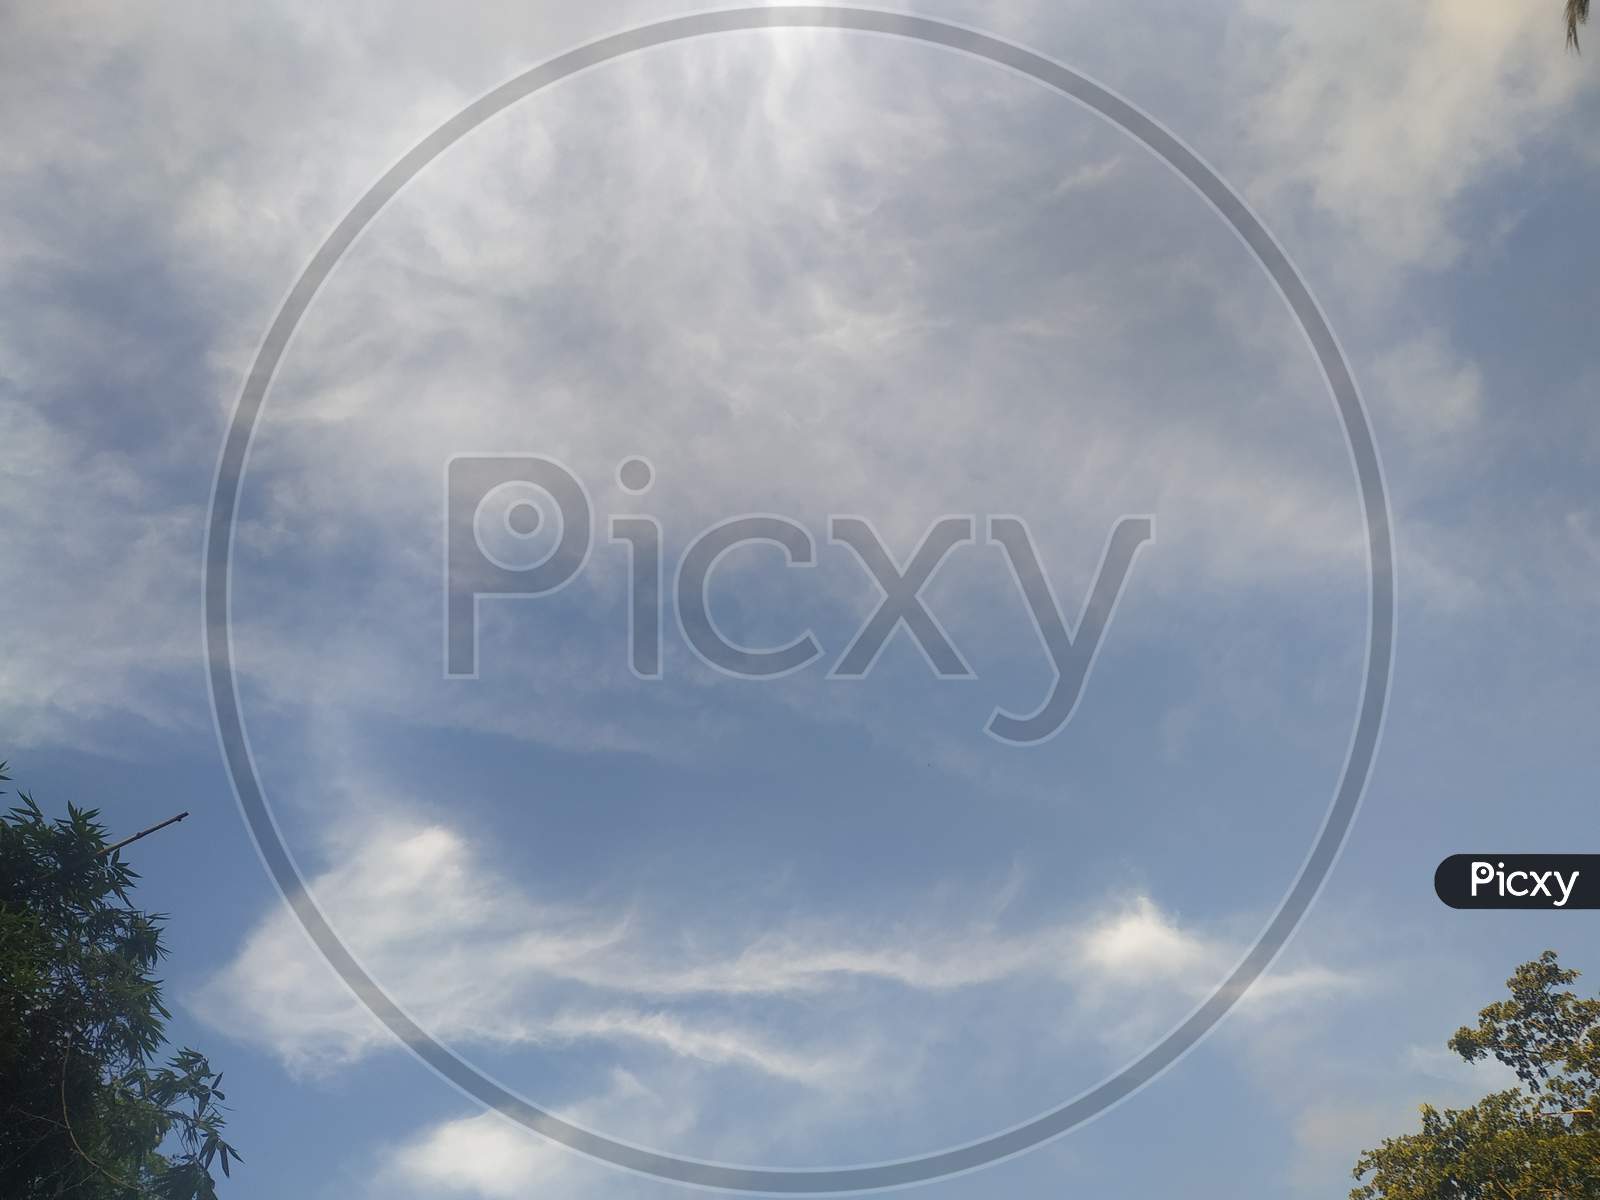 Blue and white sky background